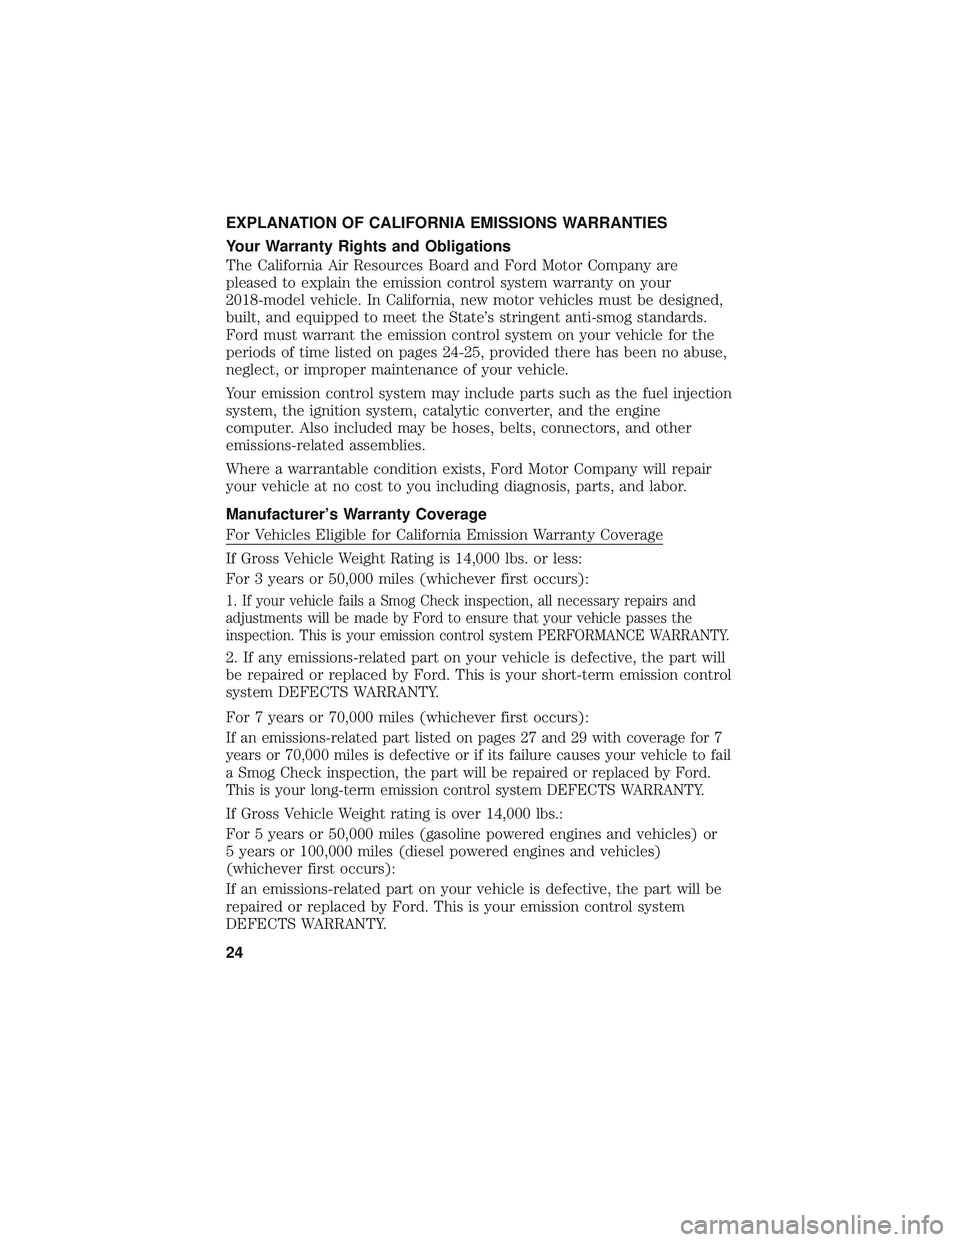 FORD E-450 2018  Warranty Guide EXPLANATION OF CALIFORNIA EMISSIONS WARRANTIES
Your Warranty Rights and Obligations
The California Air Resources Board and Ford Motor Company are
pleased to explain the emission control system warrant